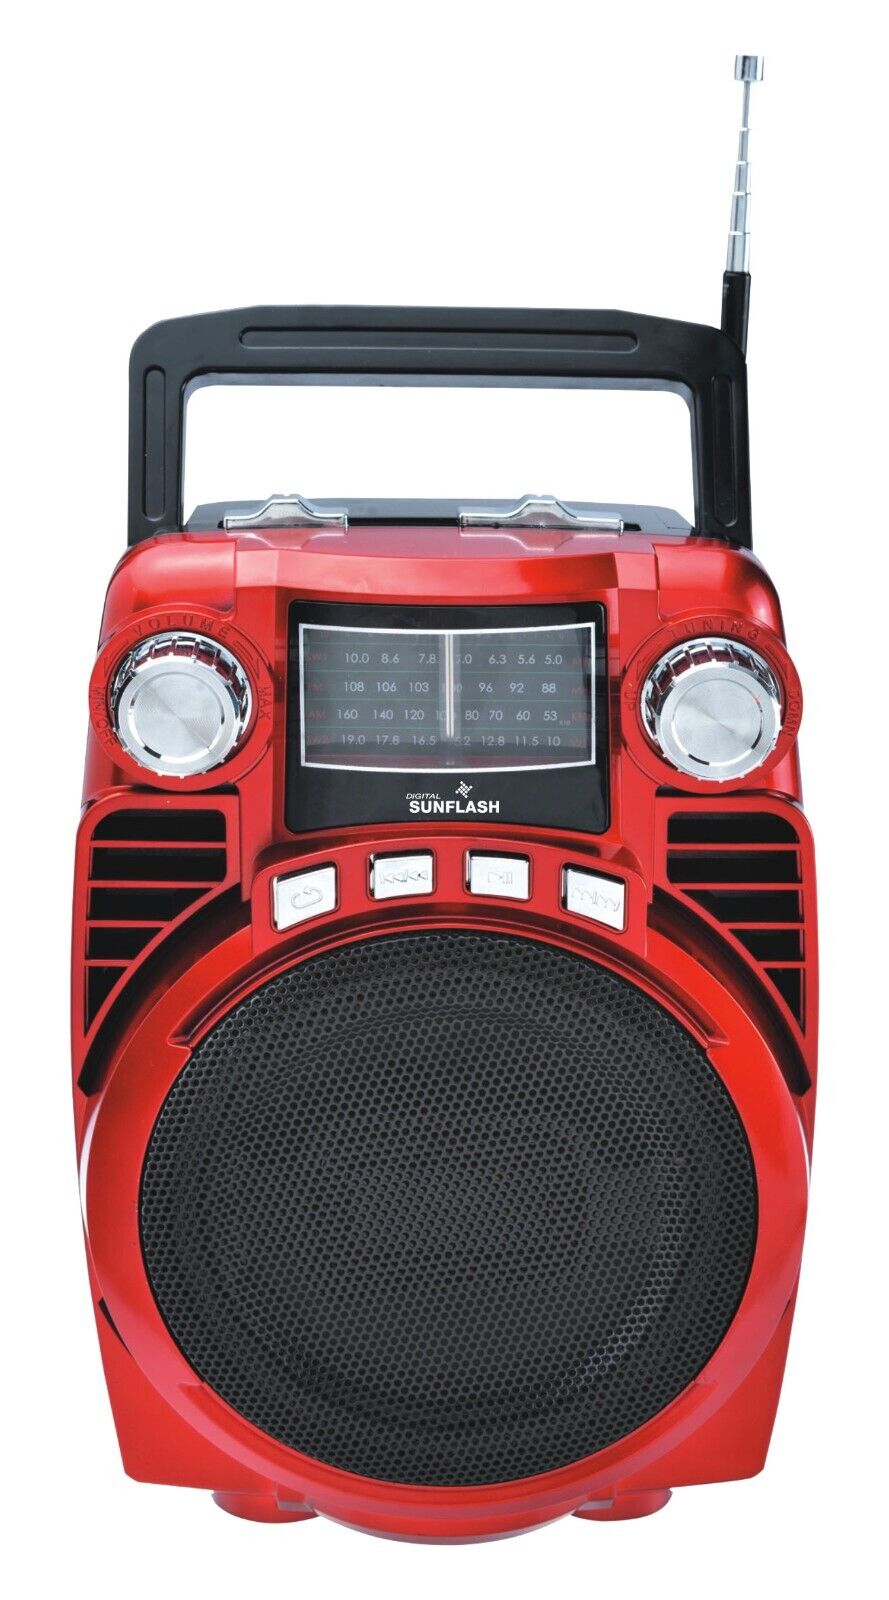 DIGITAL SUNFLASH SF-144 Portable and Rechargeable Speaker with Built-in Bluetooth, AM/FM, 1-2 SW, USB, SD, AUX, 4-Band Radio